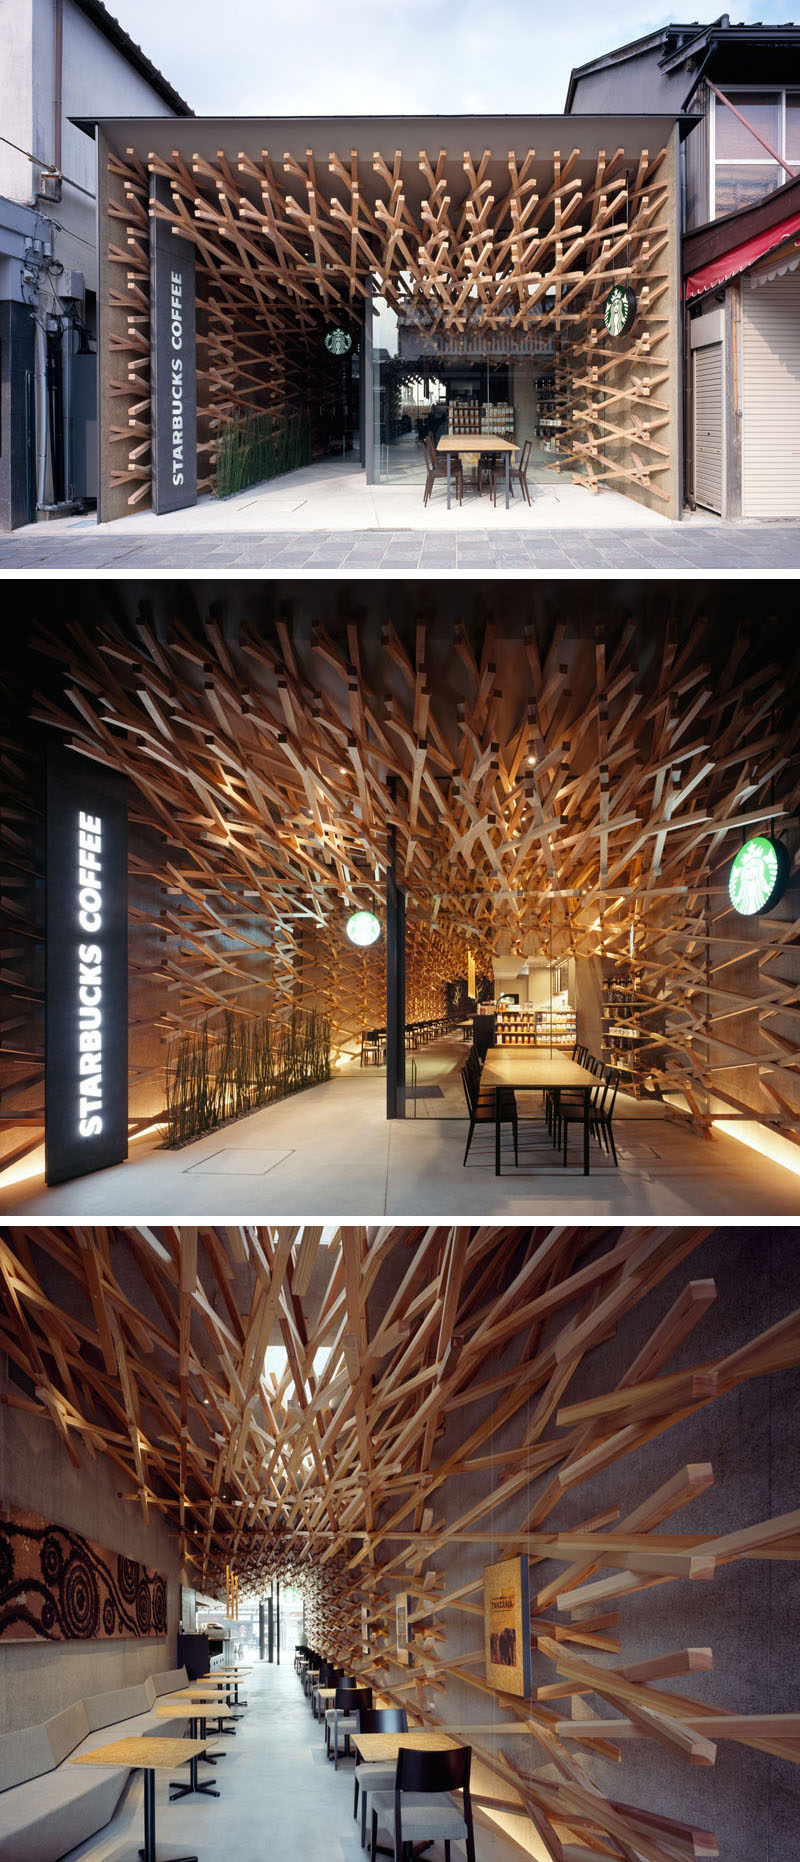 11 Starbucks Coffee Shops From Around The World // In an attempt to connect this Starbucks location to it's surroundings, interlocking wooden beams lead people from the streets deep into the shop. The wooden beams were also used in a nod to sustainability and recycling as they can easily be dismantled and used again somewhere else.